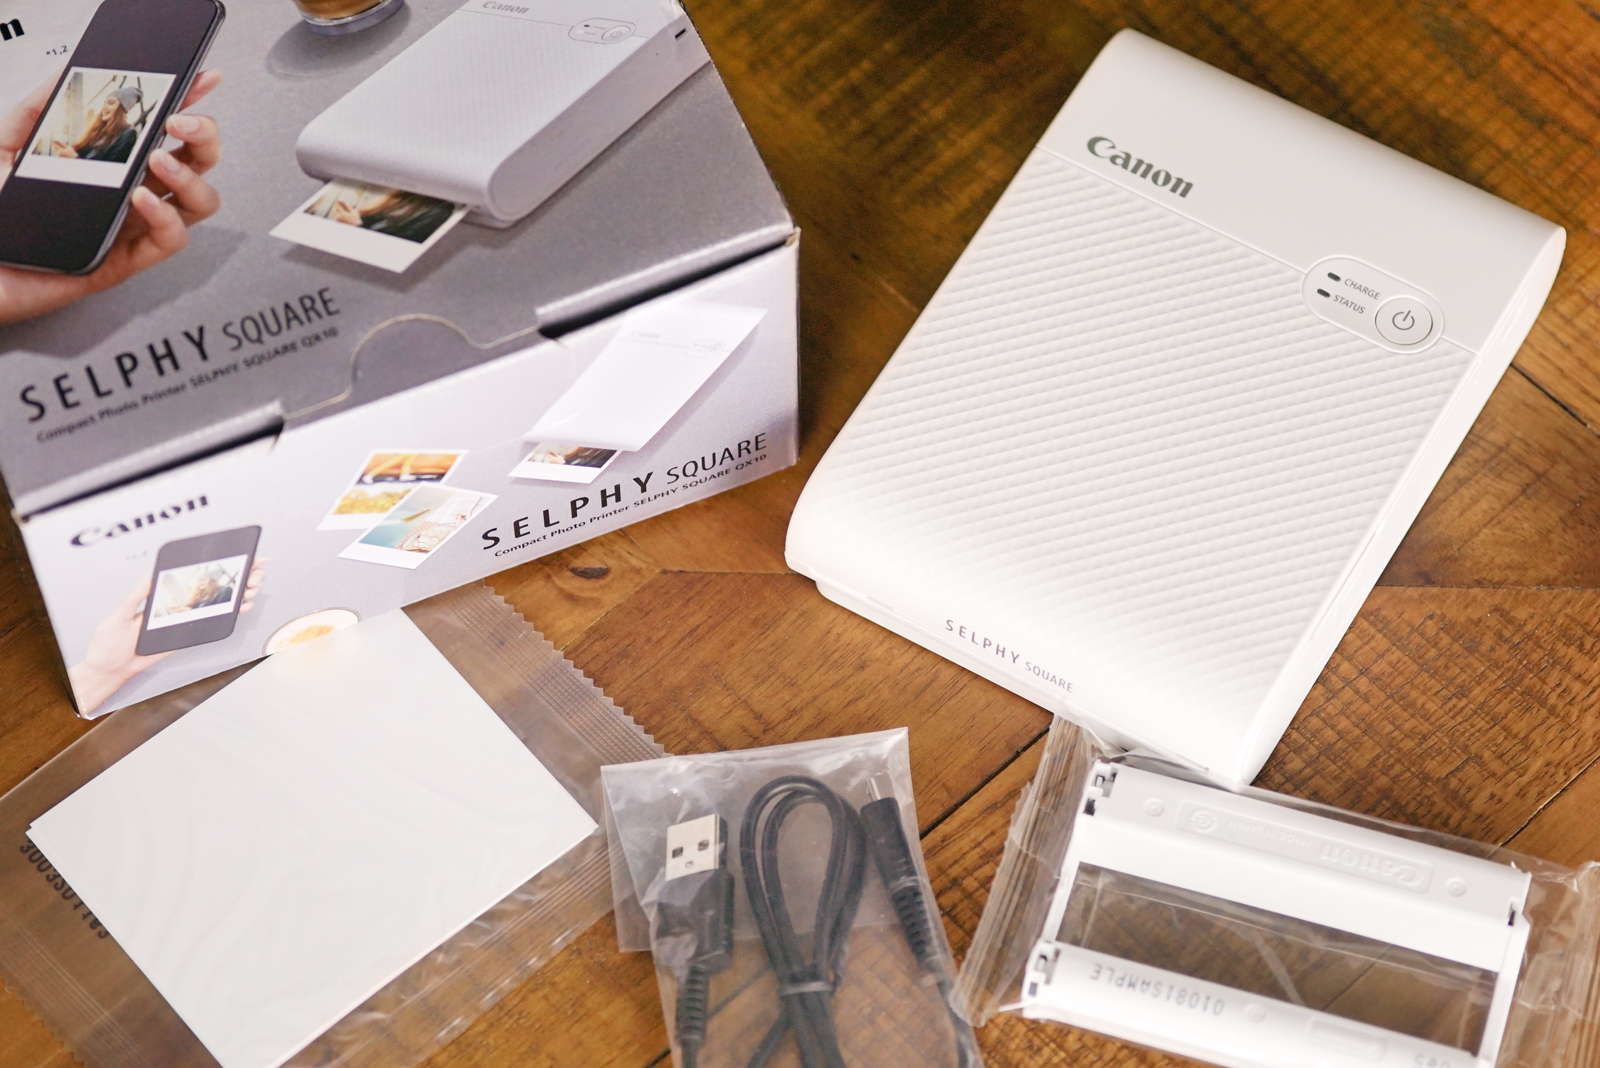 Canon Selphy Square QX10 photo printer review: Going square